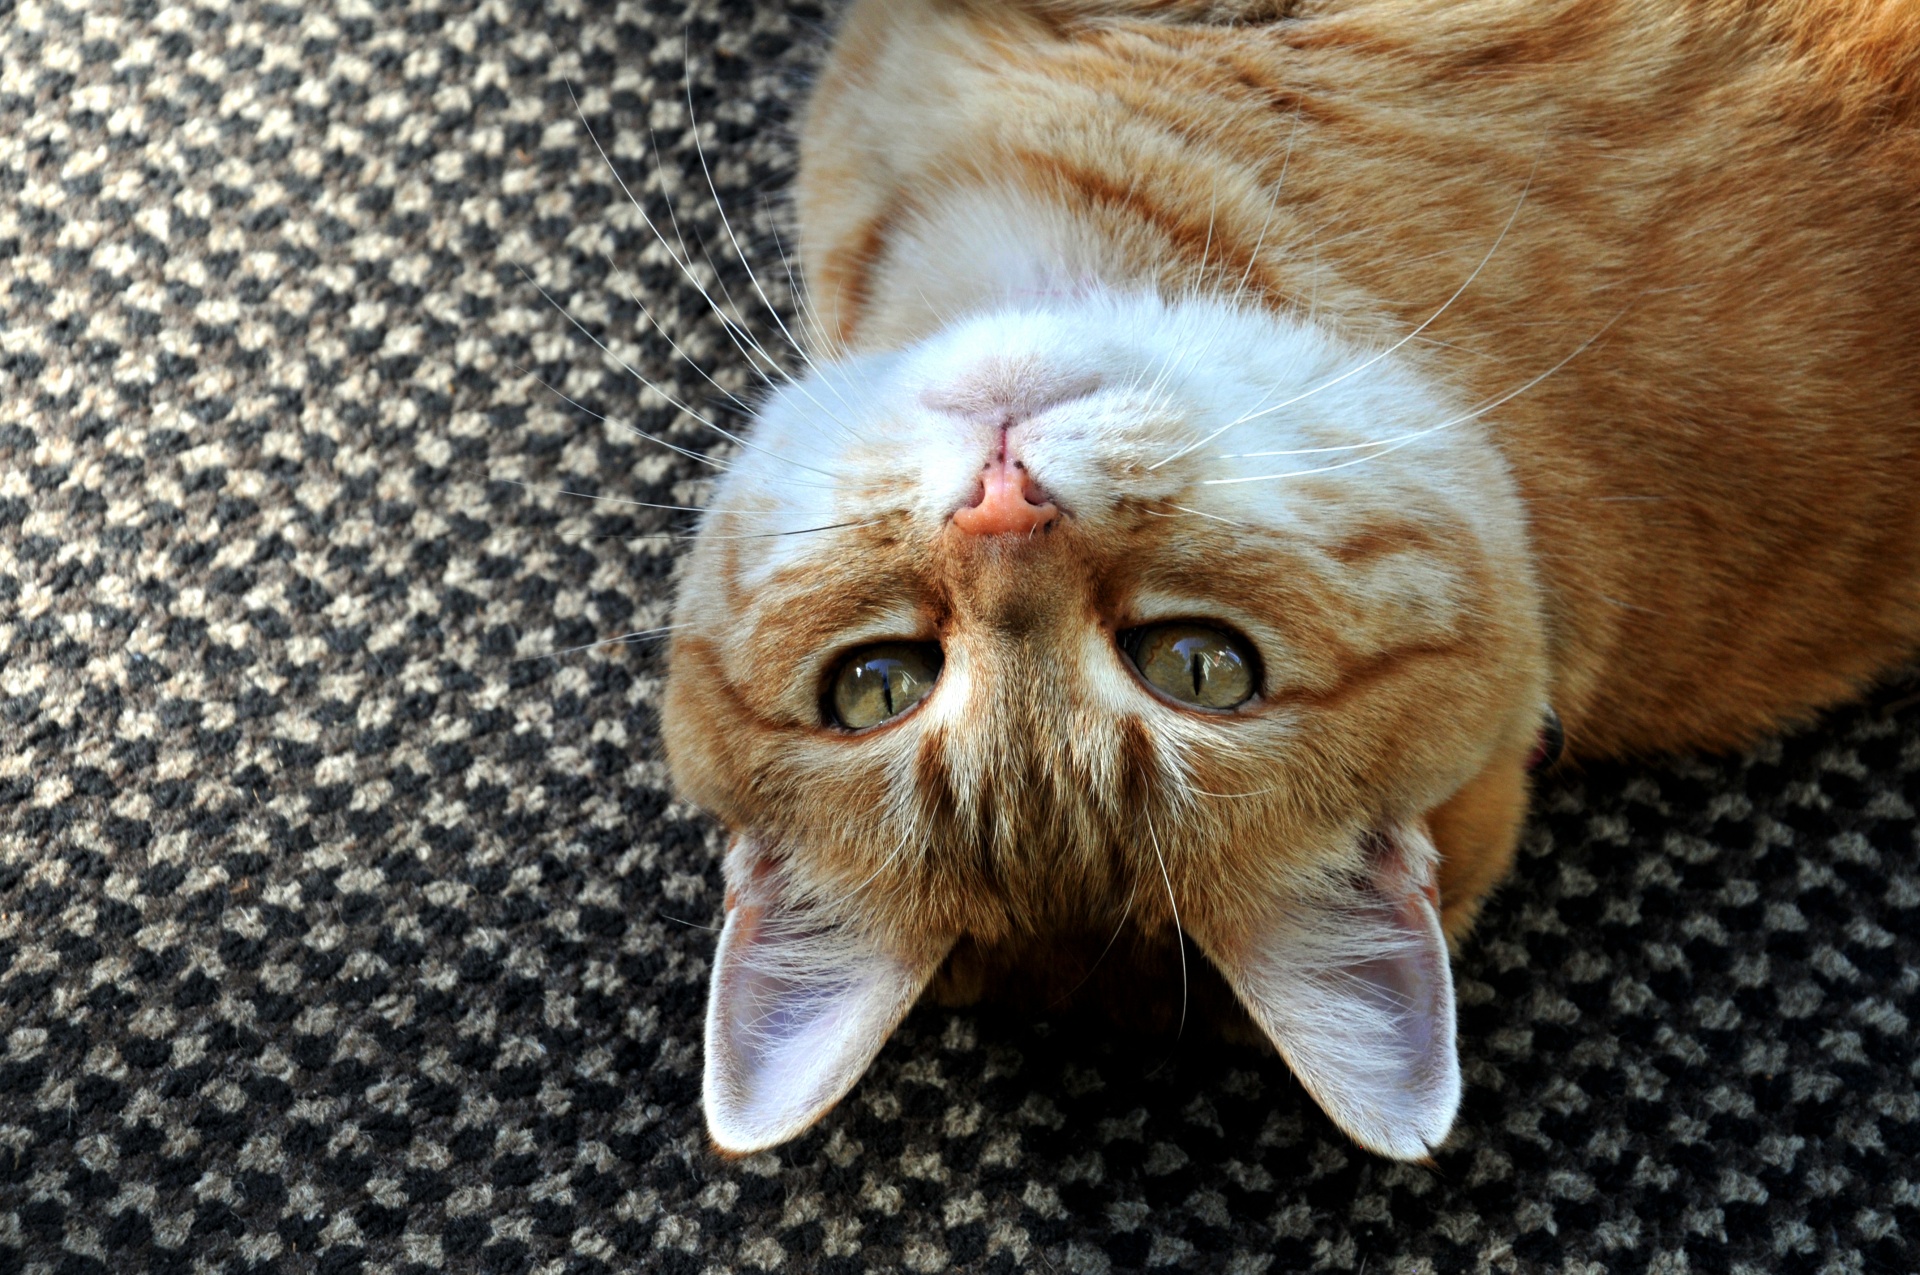 The head of a silly orange tabby cat looking into Camera upside down